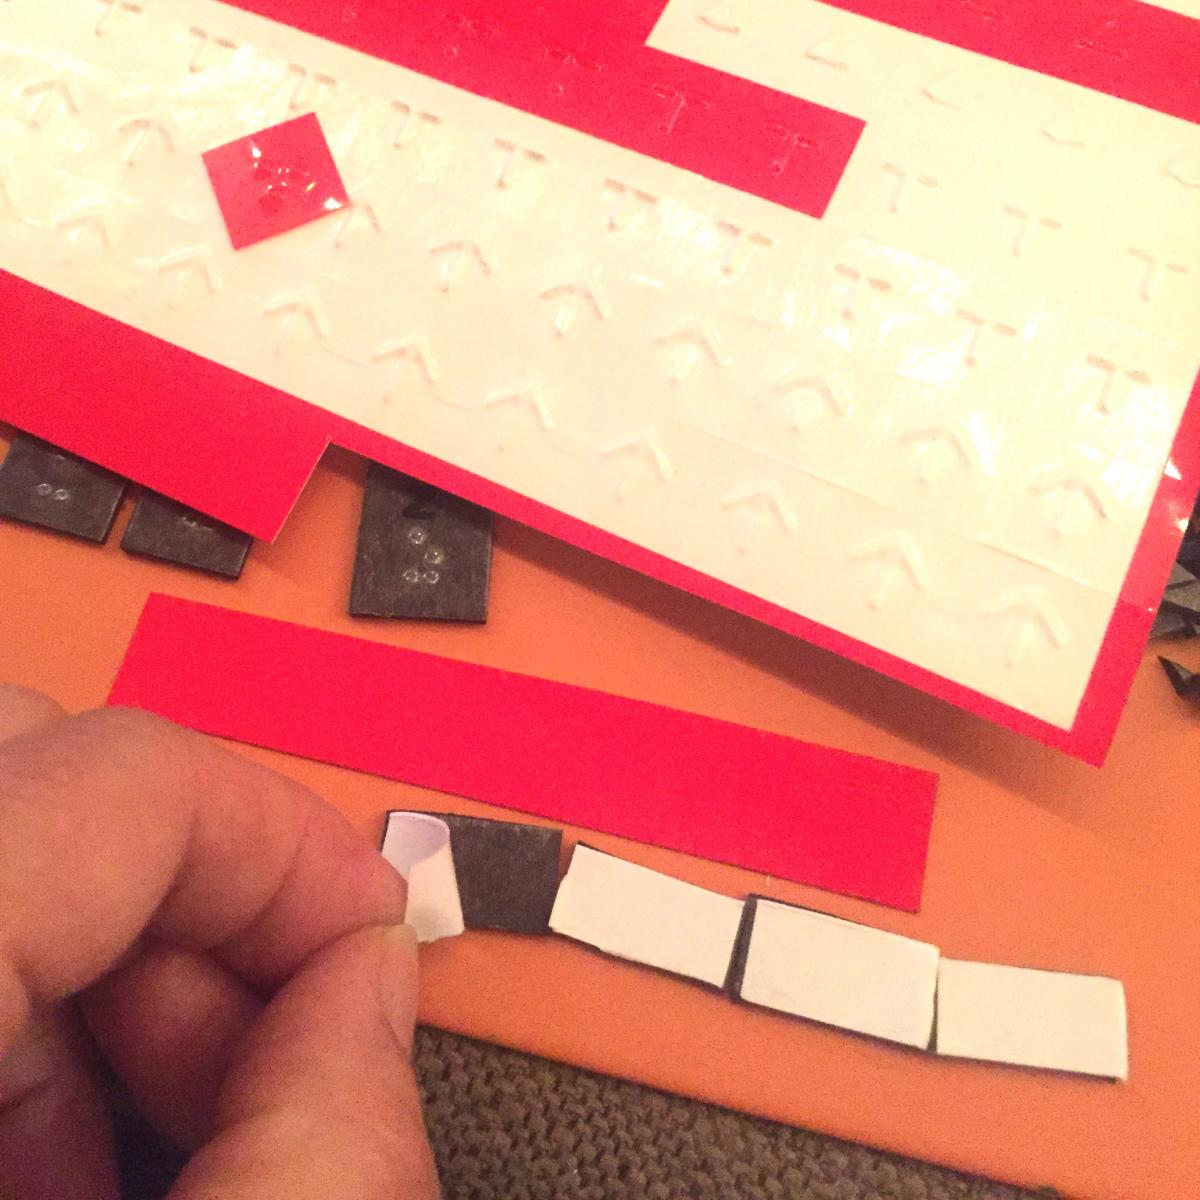 four rectangles lined up horizontally, long red rectangle ready to stick on top, I'm starting to peel paper off magnet to reveal adhesive